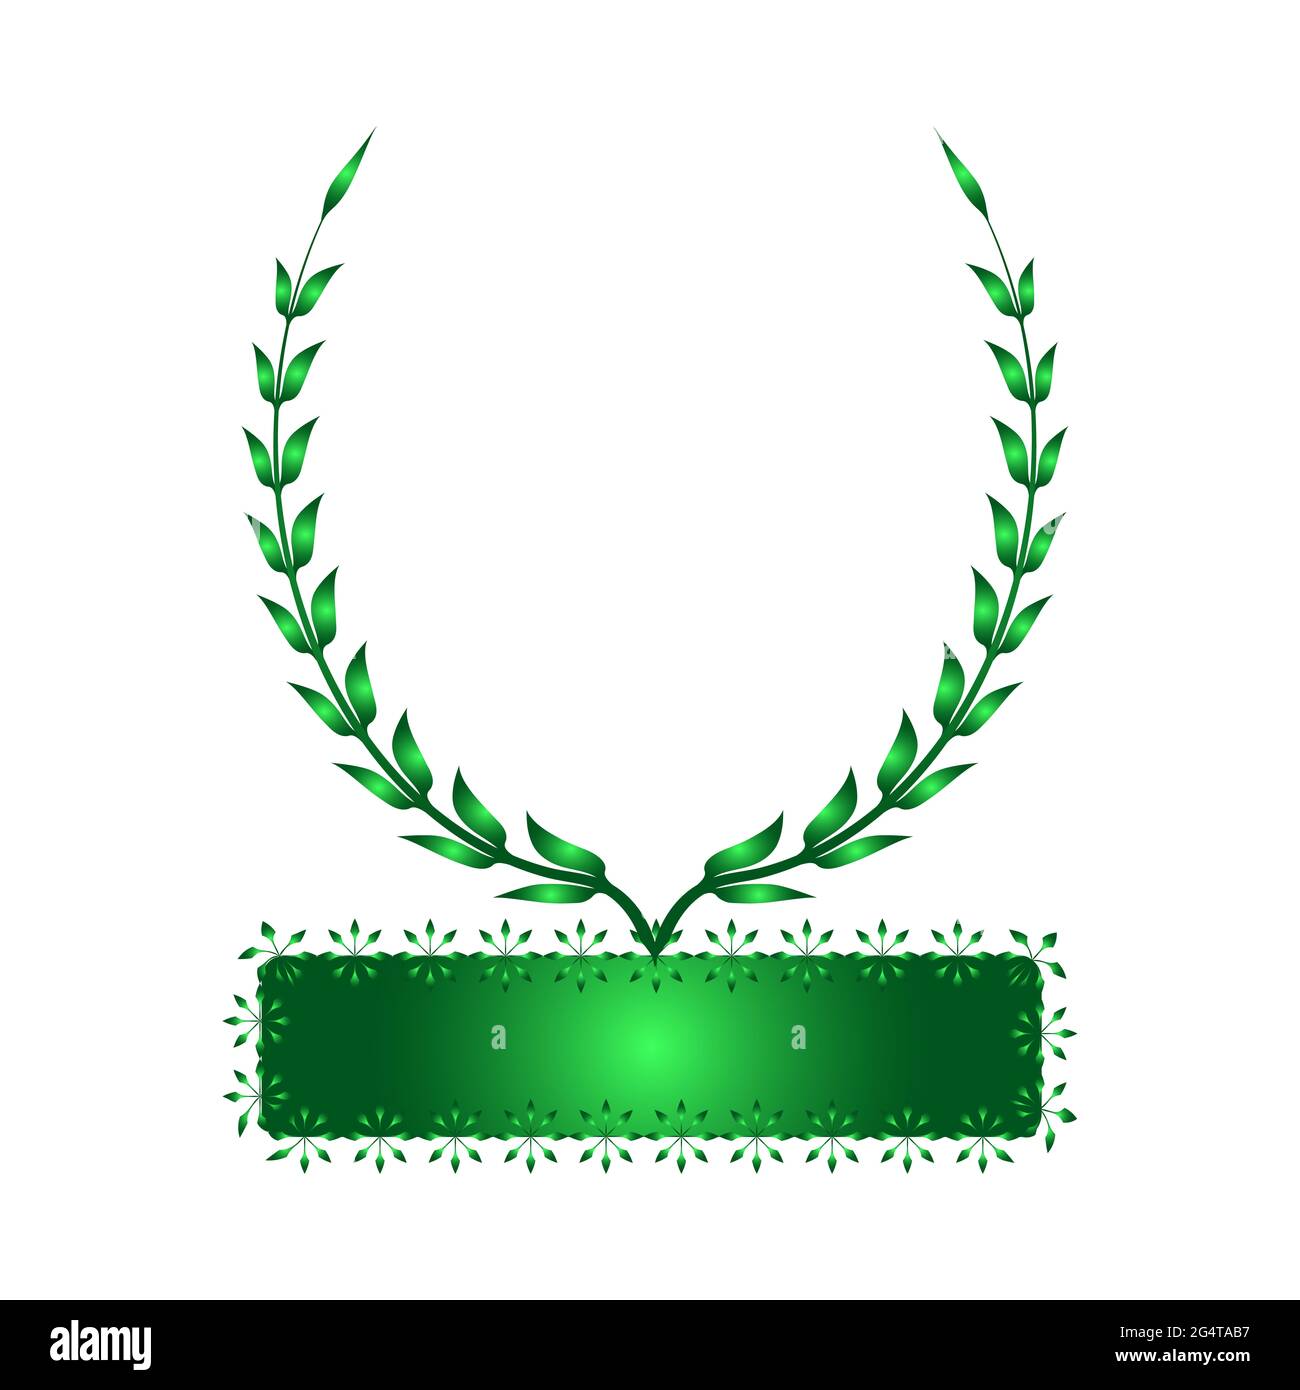 Natural background, Emerald wreath Stock Photo